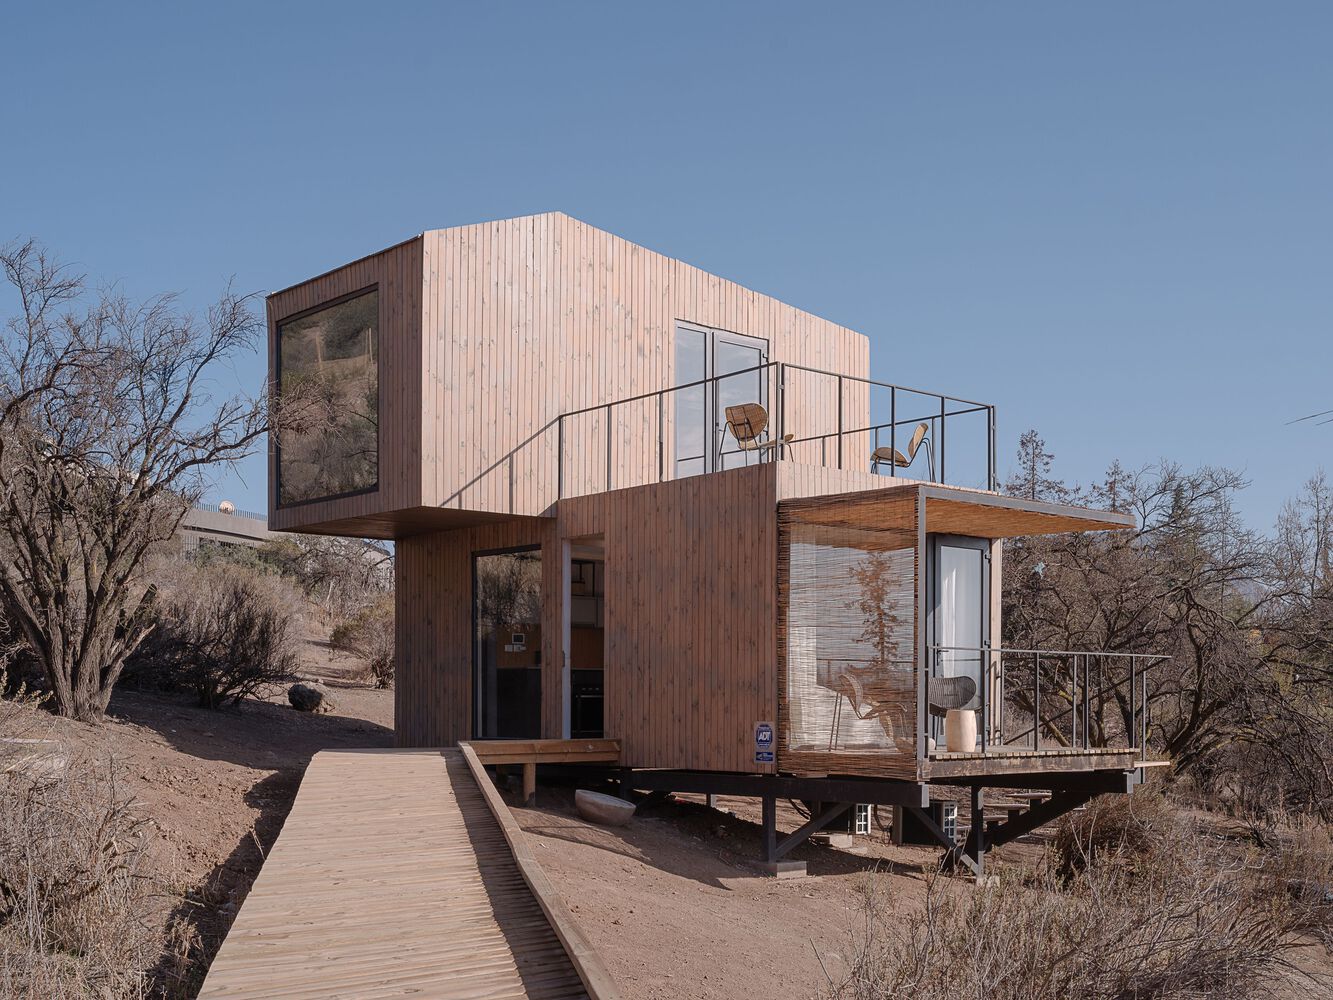 a two story sculptural wooden cabin with a modern tiny house design.